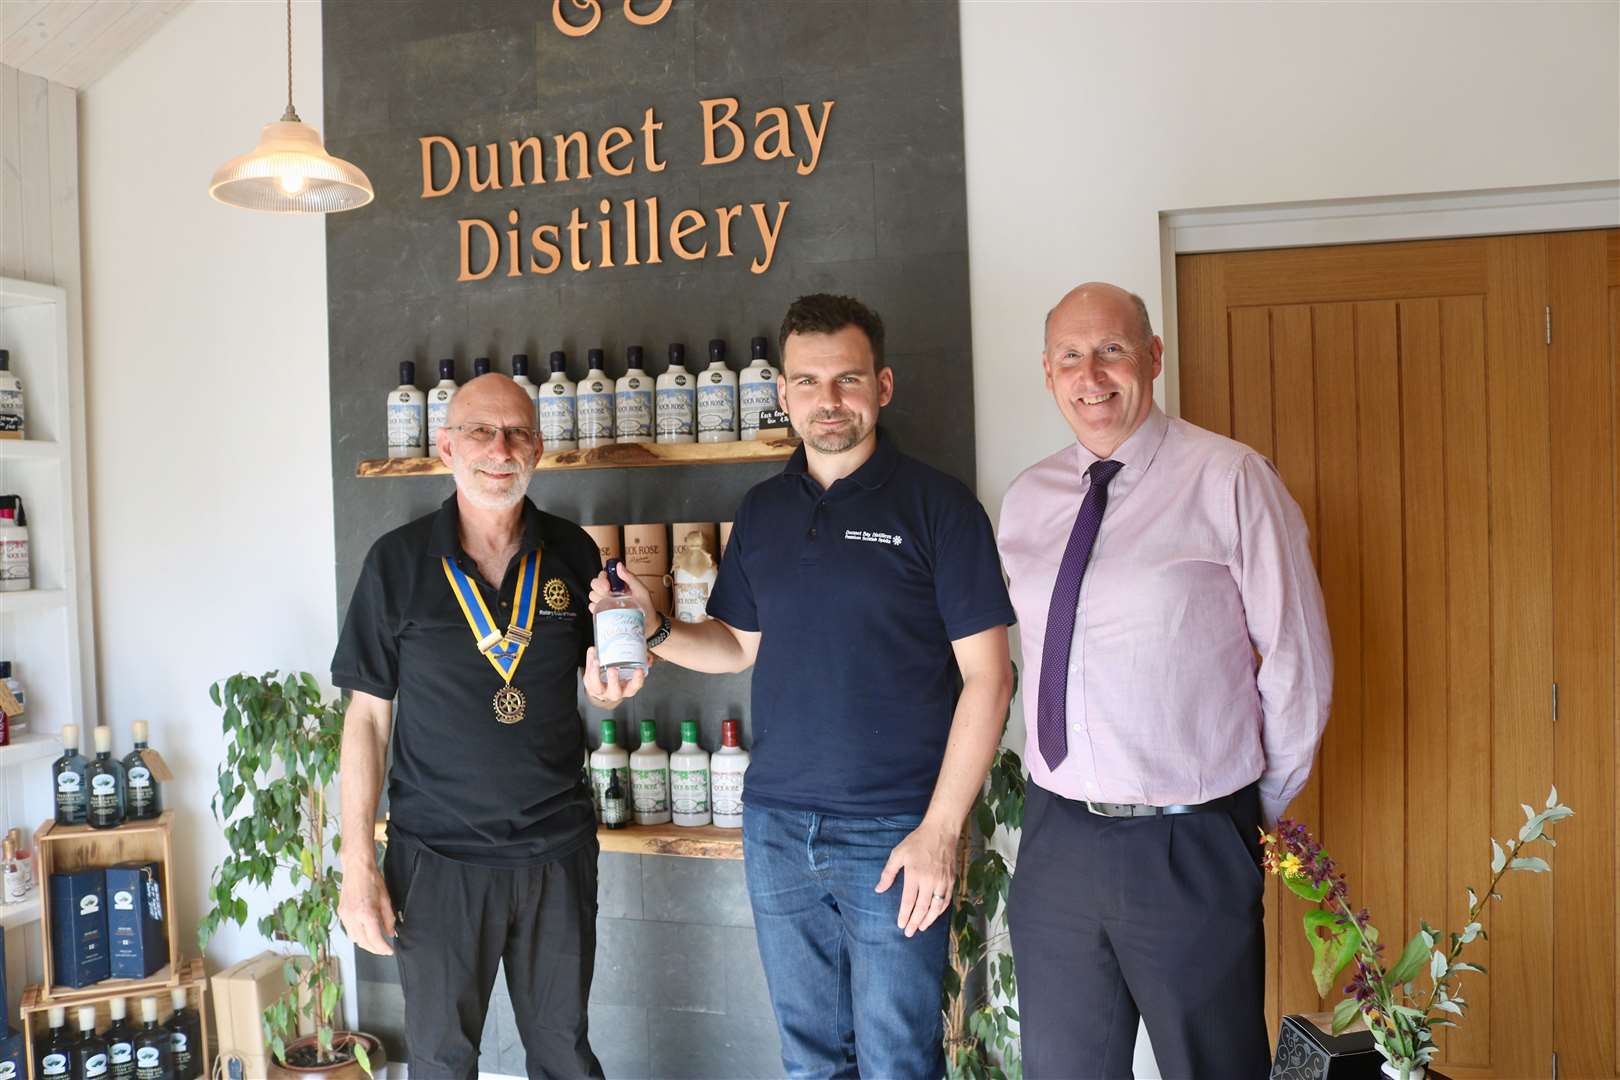 Displaying the first bottle of Cold Water Gin produced at the Dunnet distillery are (from left) Thurso Rotary Club president Alan Gerrard, Martin Murray, of Dunnet Bay Distillers, and Rotary treasurer Graeme Dunnett.